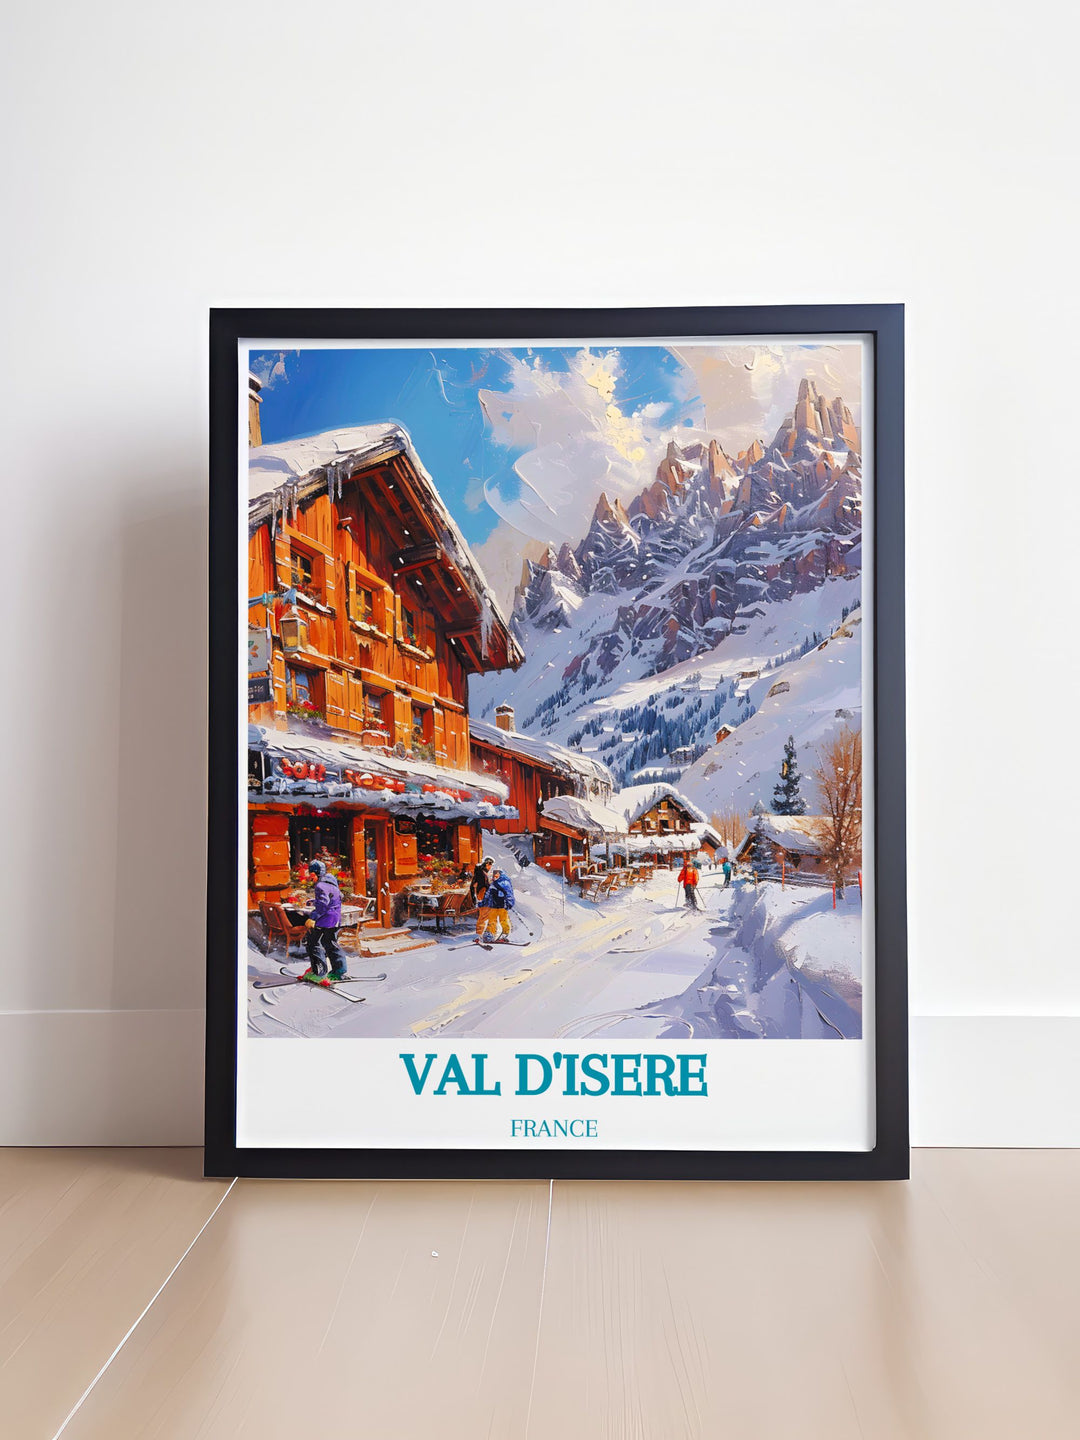 Celebrate the rich history and cultural heritage of Val dIsere with this vibrant travel poster, capturing the lively atmosphere and traditional charm of the Solaise ski resort nestled in the heart of the French Alps.